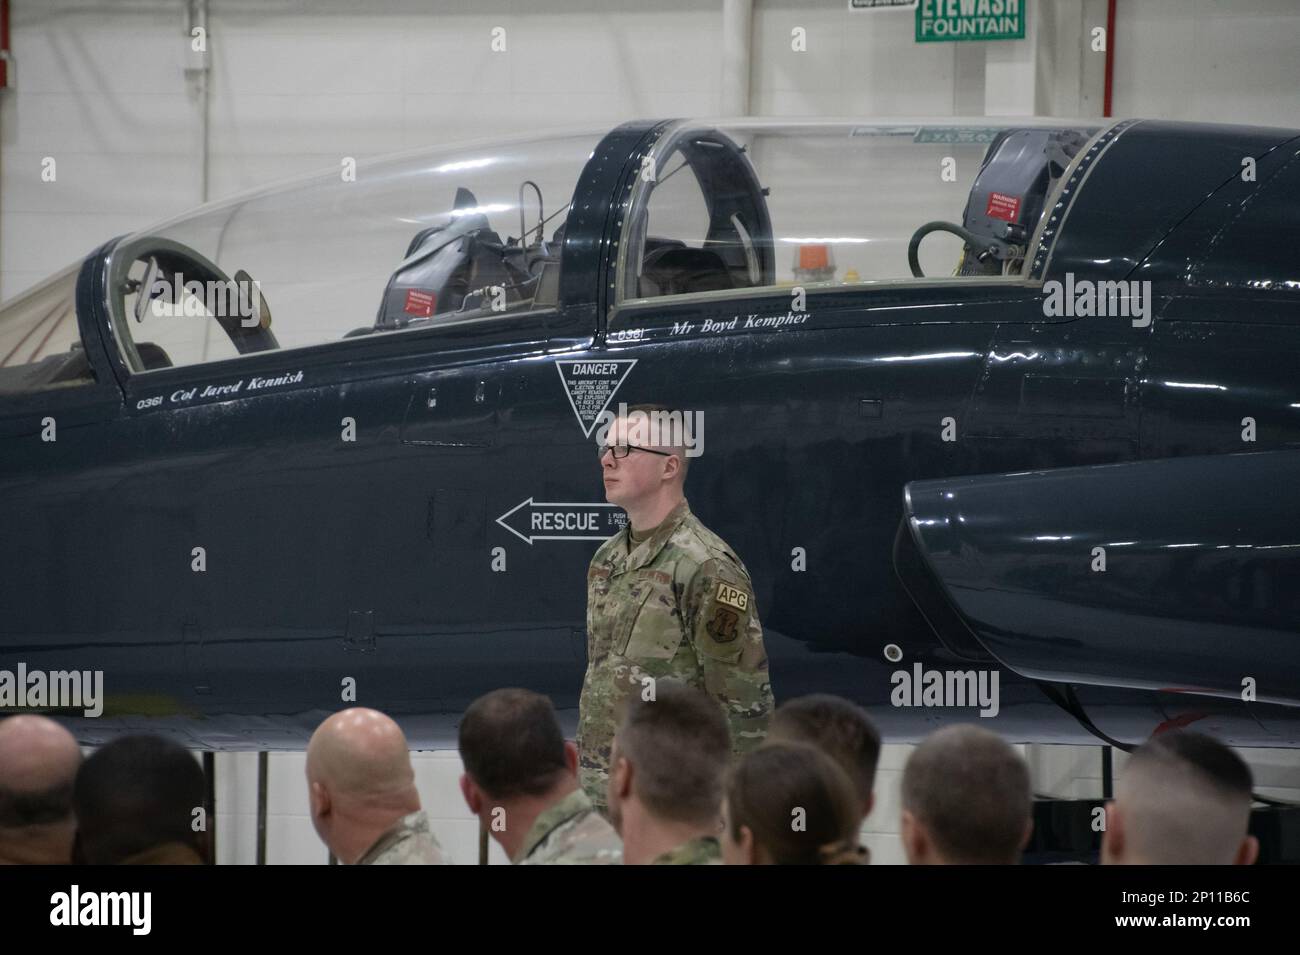 Senior Airman Justin Meinershagen, 131st Bomb Wing maintainer, stands at parade rest after revealing the newly-added name of Col. Jared Kennish to a T-38 Talon trainer jet during a change of command ceremony at Whiteman Air Force Base, Missouri, Feb. 3, 2023. During the ceremony Col. Jared P. Kennish assumed command of the 131st Bomb Wing from Col. Matthew D. Calhoun. Stock Photo